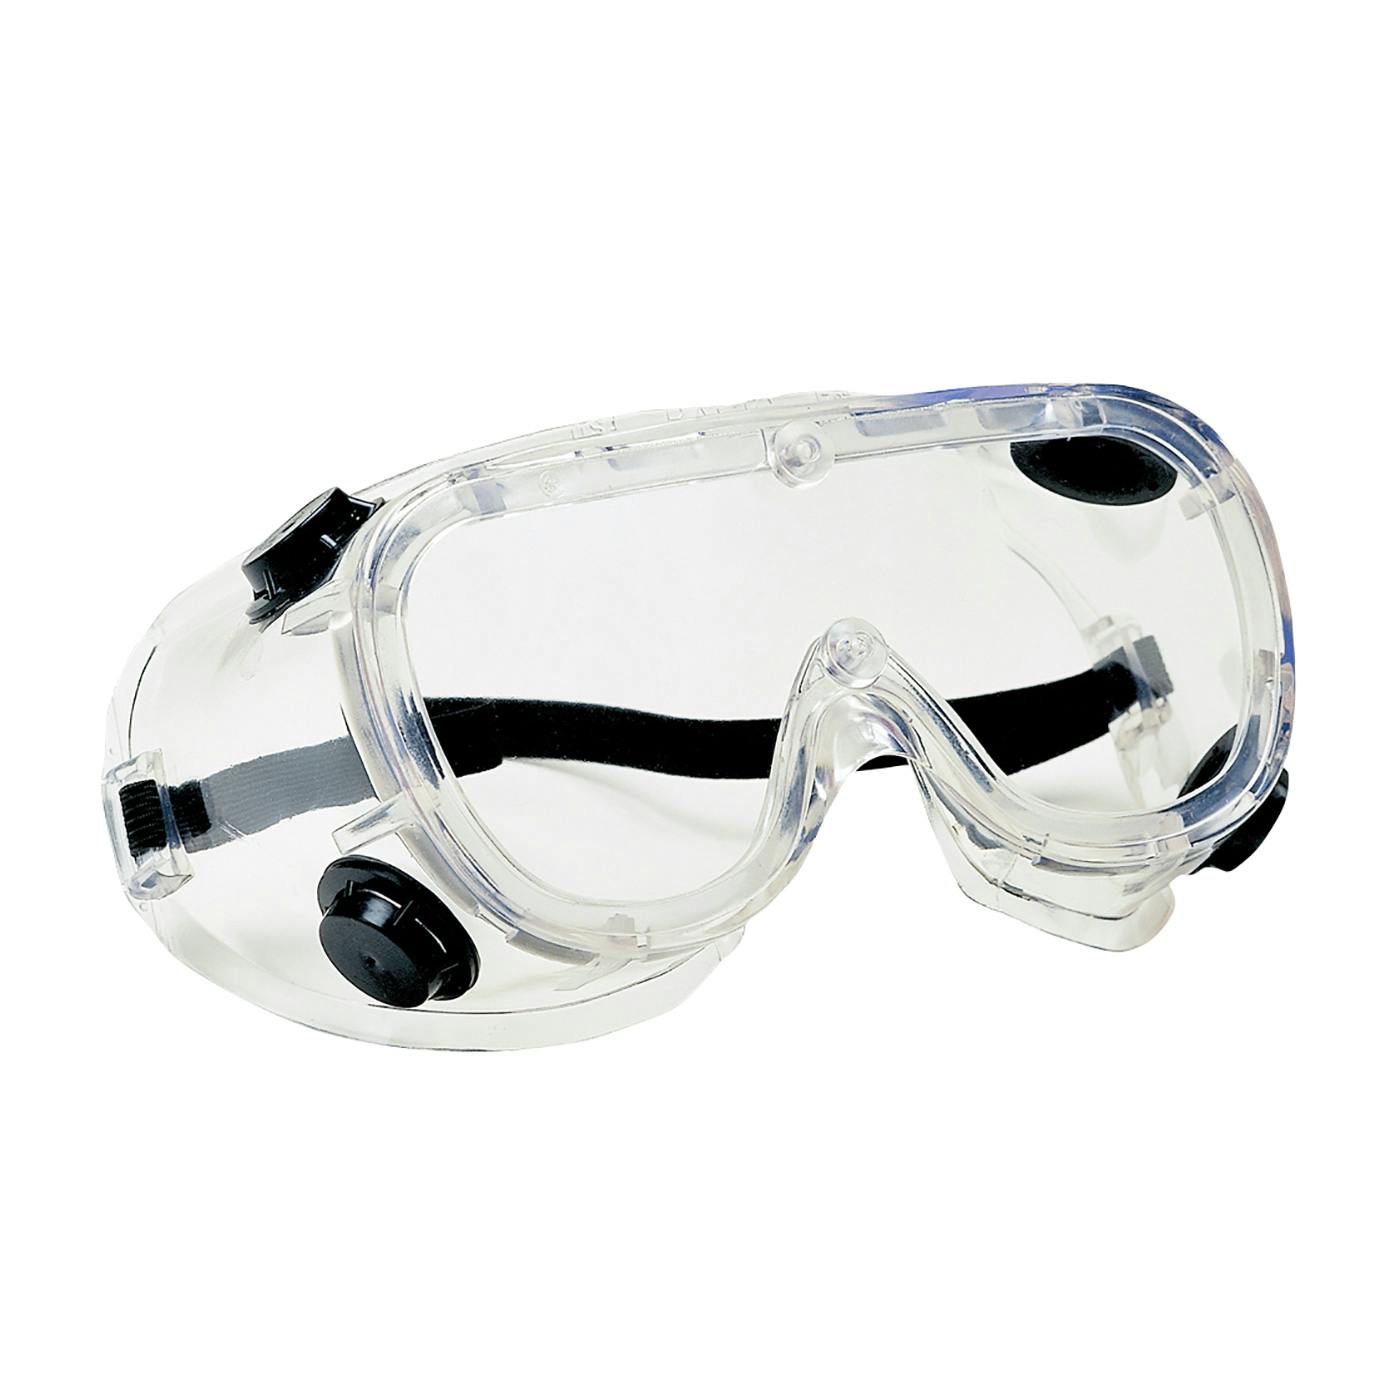 Indirect Vent Goggle with Clear Body, Clear Lens and Anti-Scratch / Anti-Fog Coating, Clear (248-4401-400) - OS_1